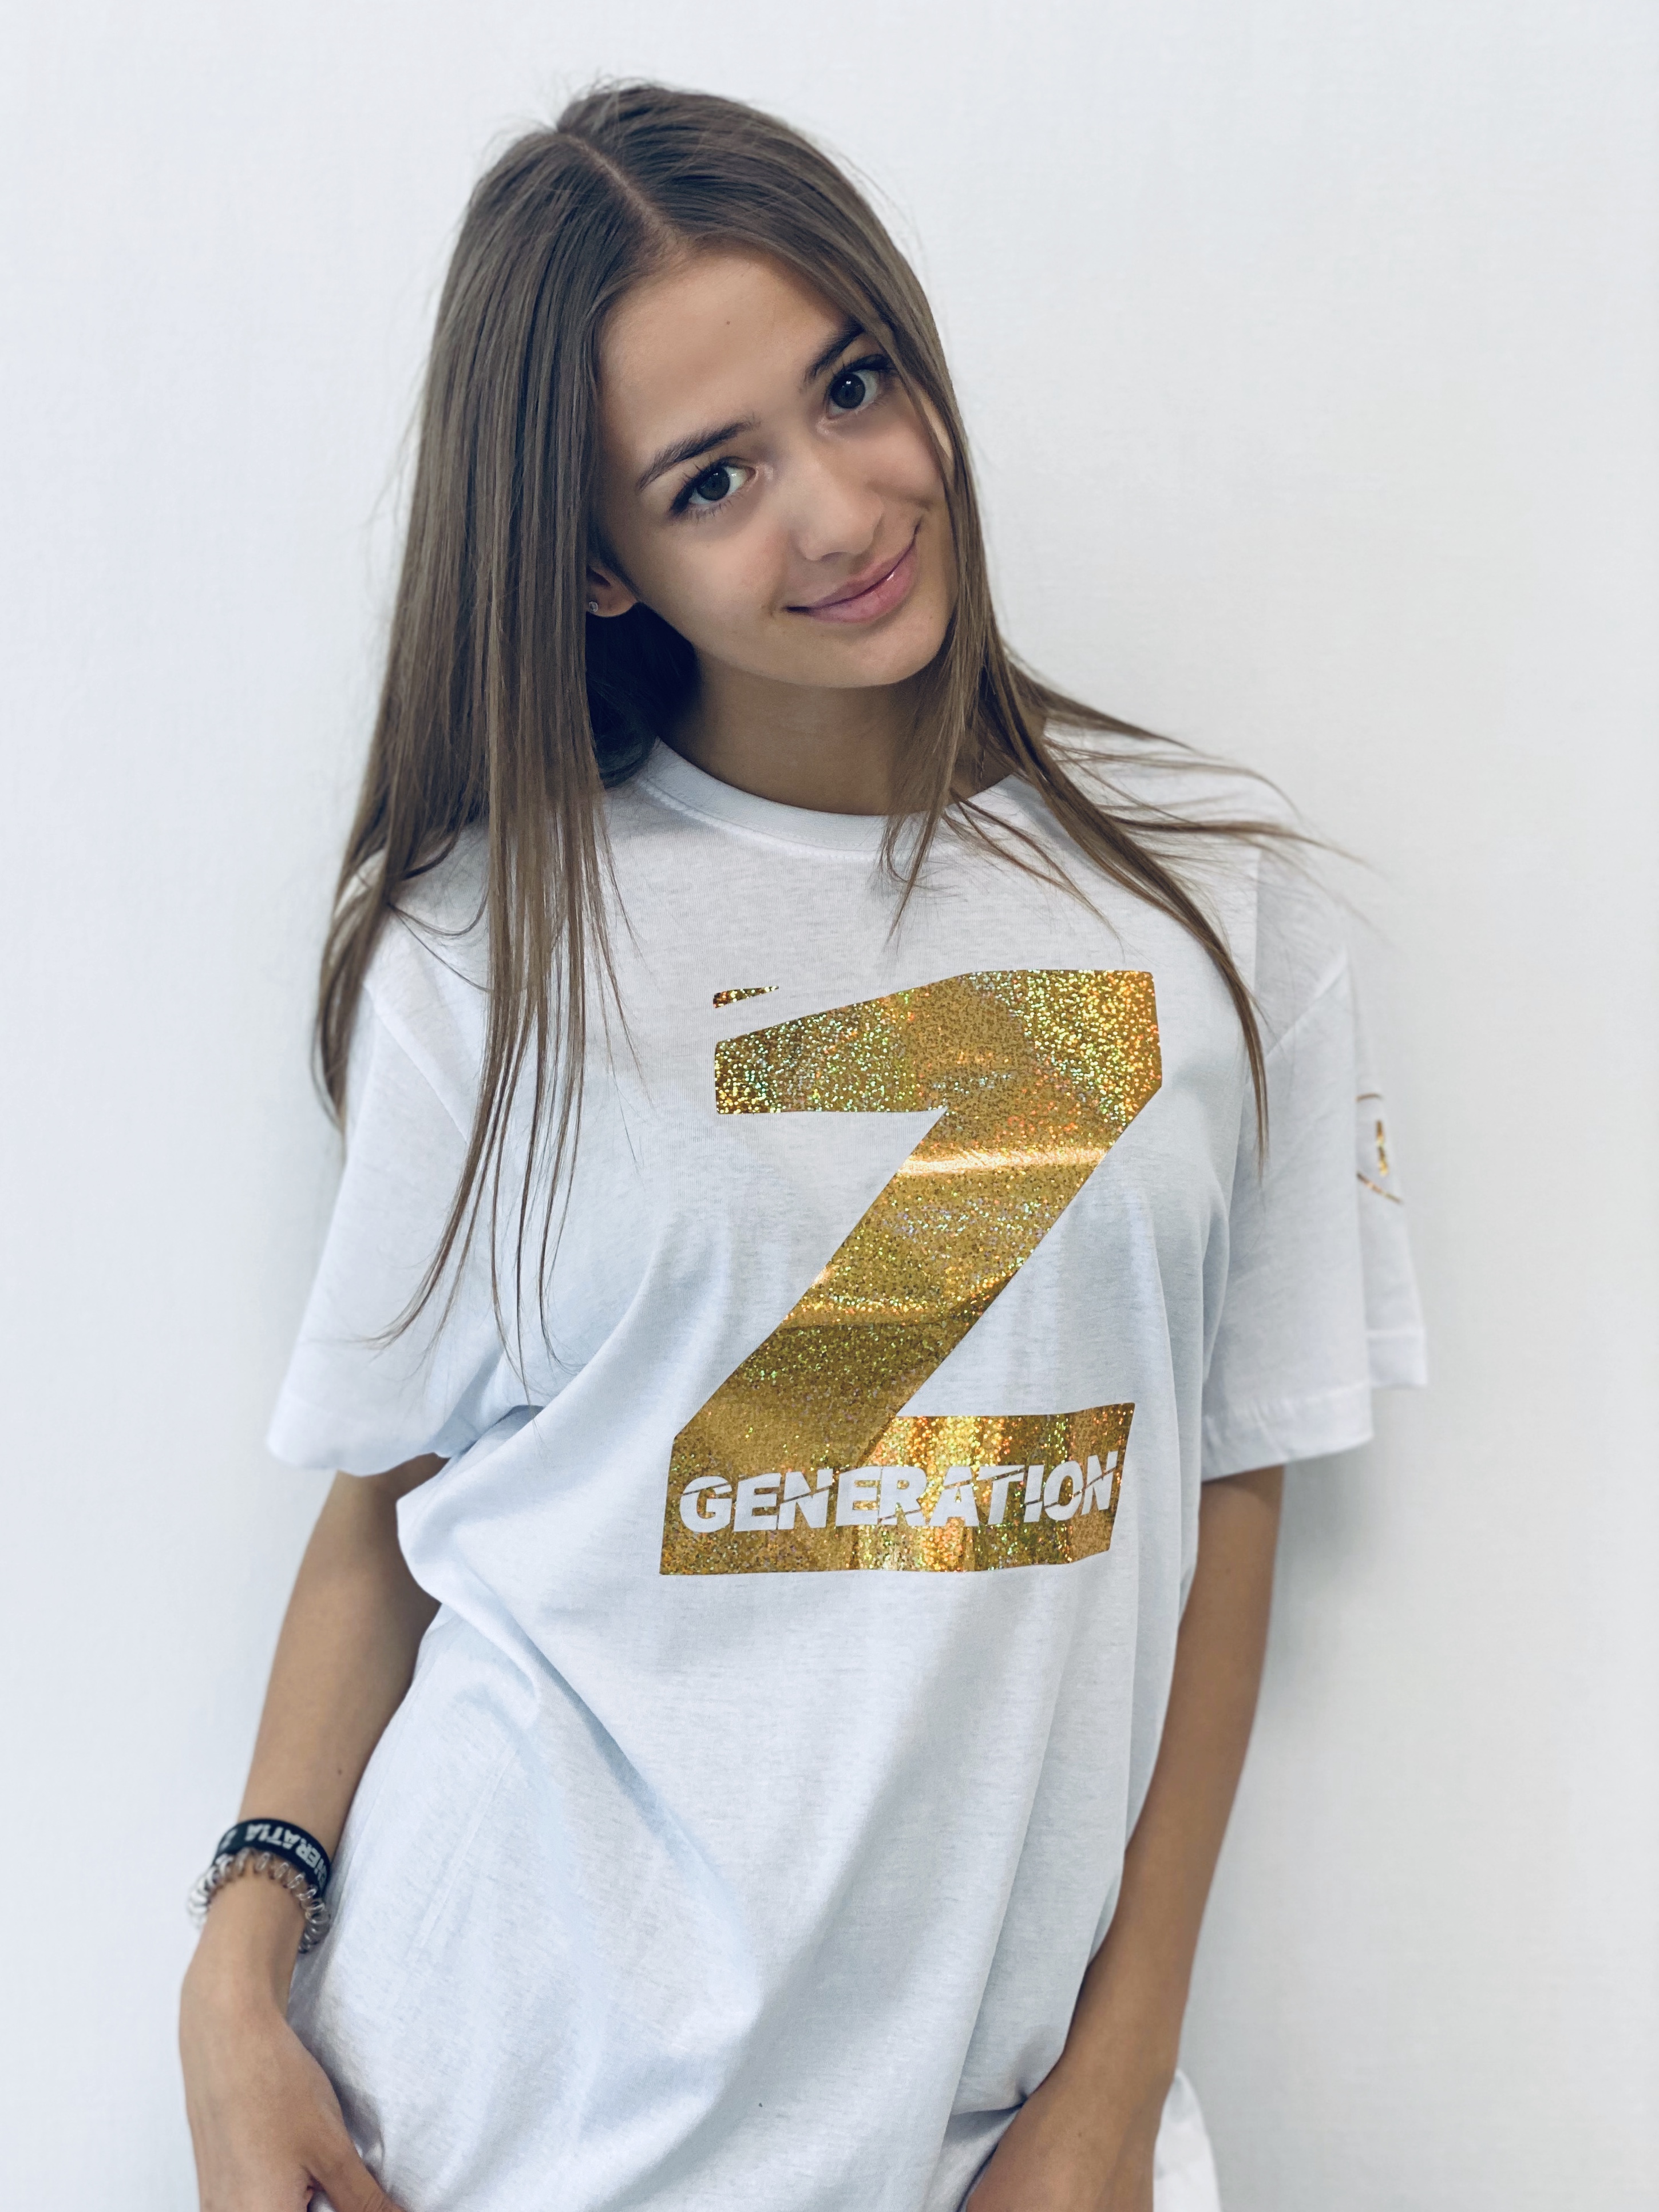 Feud Unrelenting Inactive TRICOU ALB Z GENERATION HOLOGRAFIC GOLD - z-generation.ro